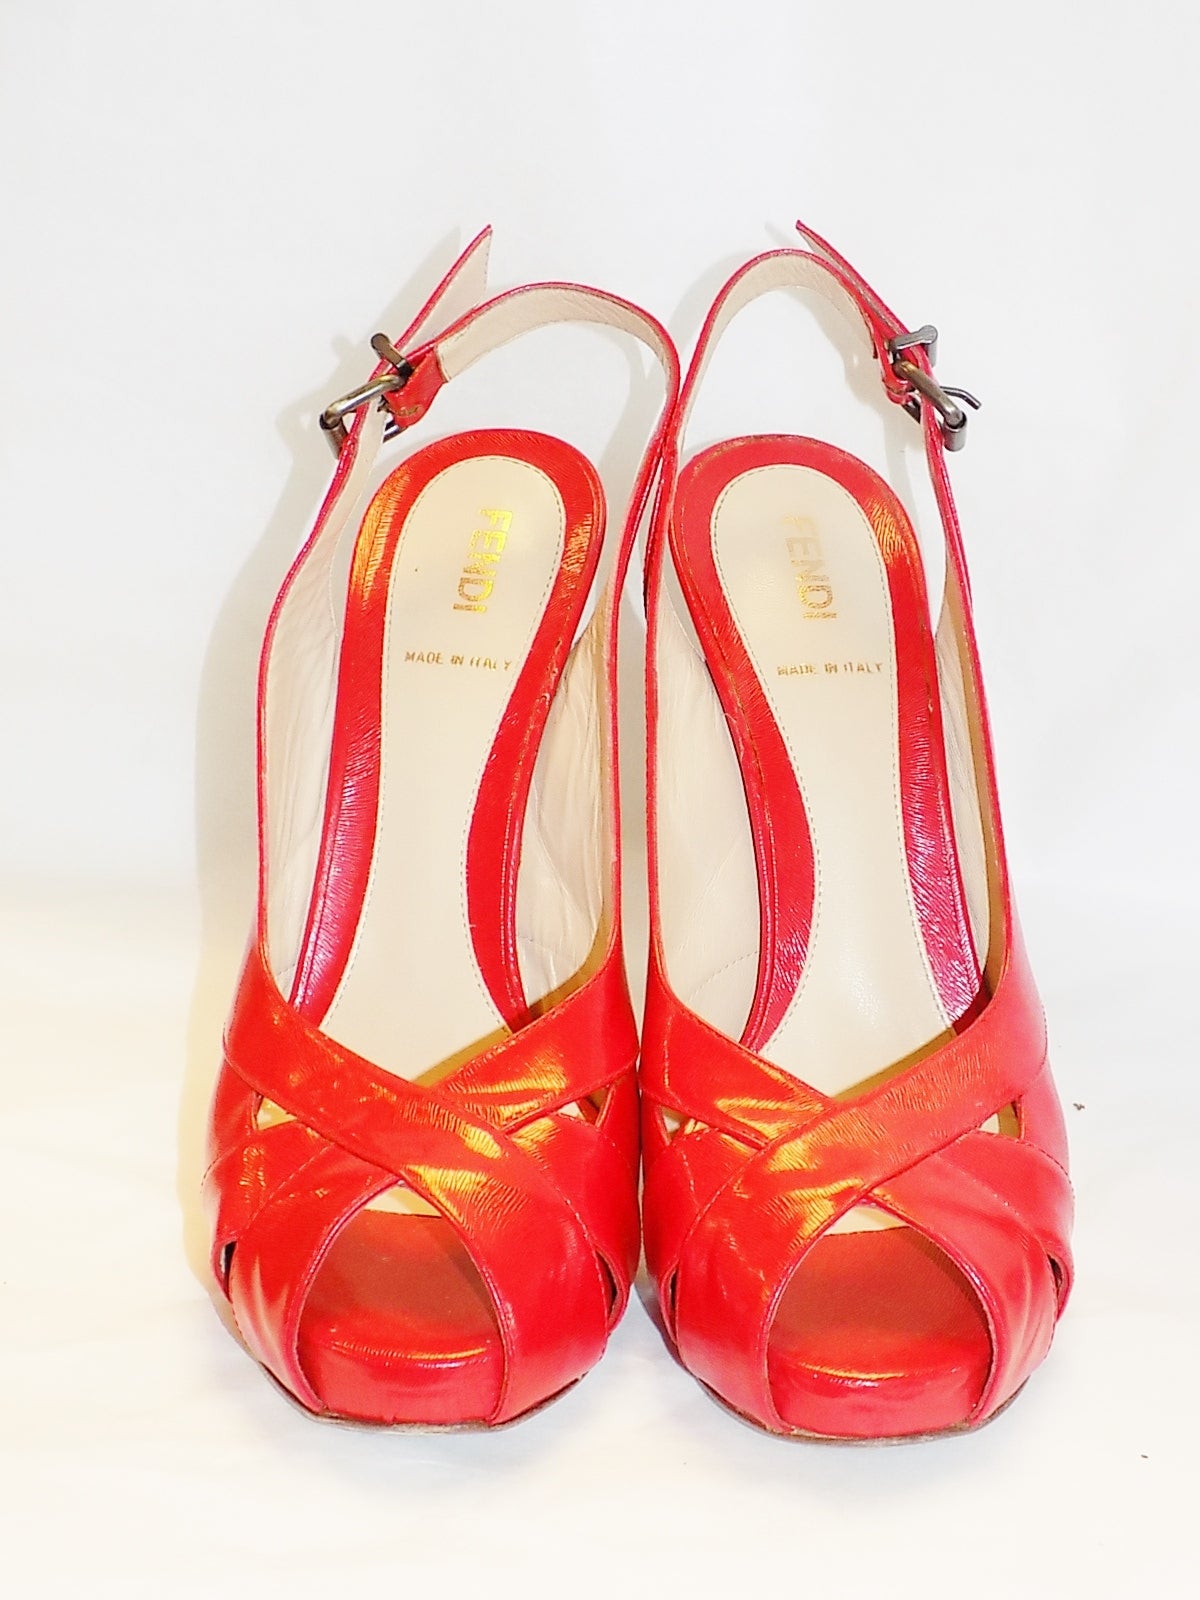 FENDI Fabulous Sexy RED  sandals shoes  sz 38. Worn few times in excellent condition. Round stacked heel 5 inches